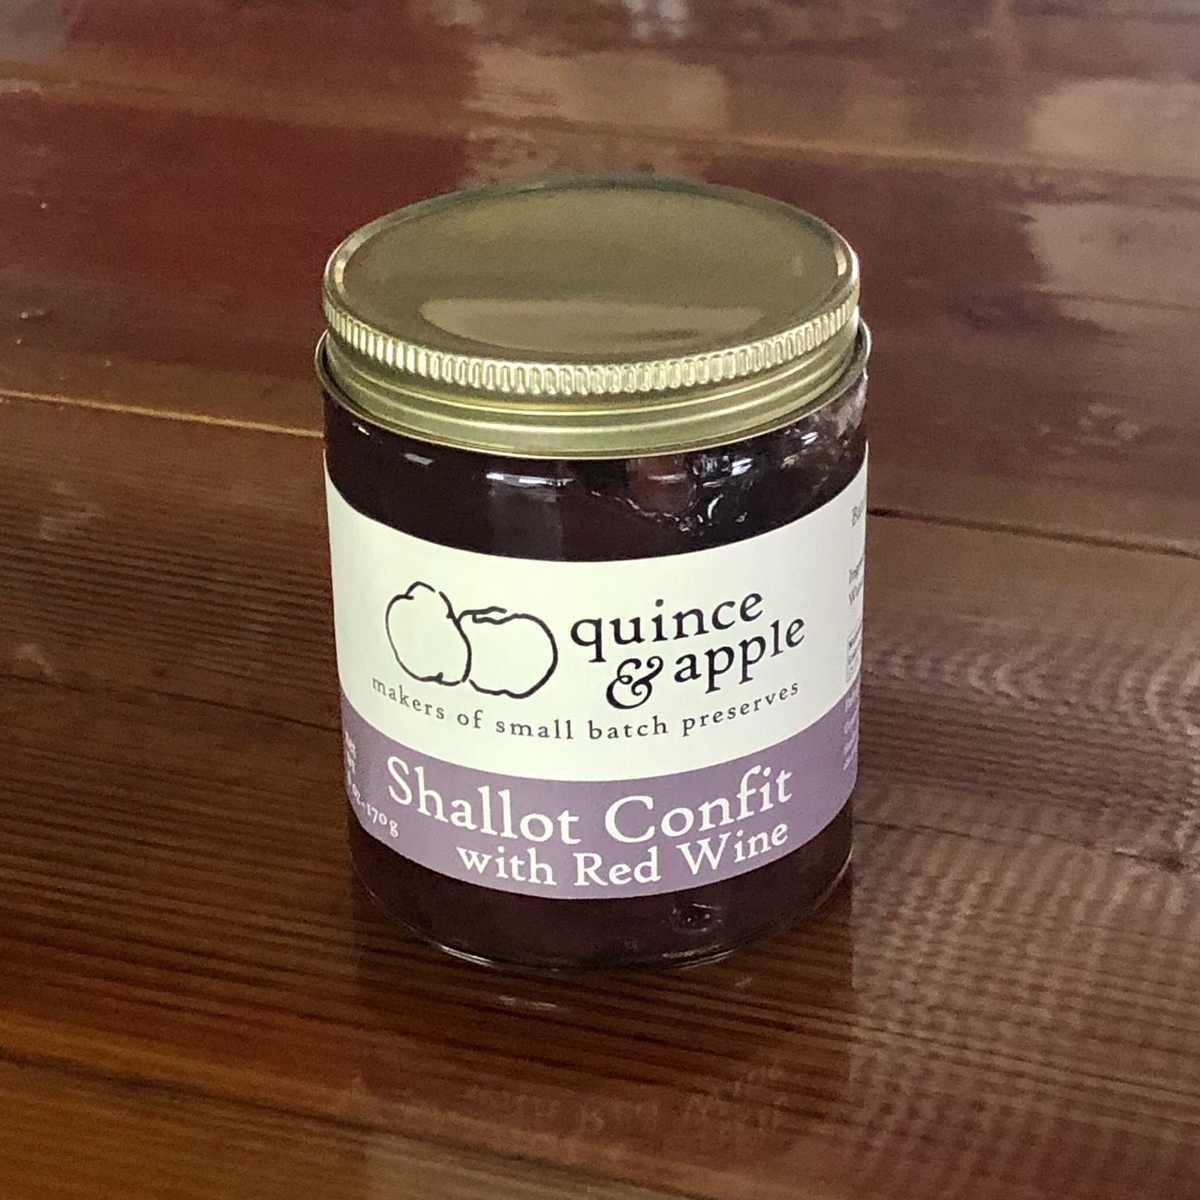 Shallot Confit with Red Wine - your next level onion jam - Quince & Apple